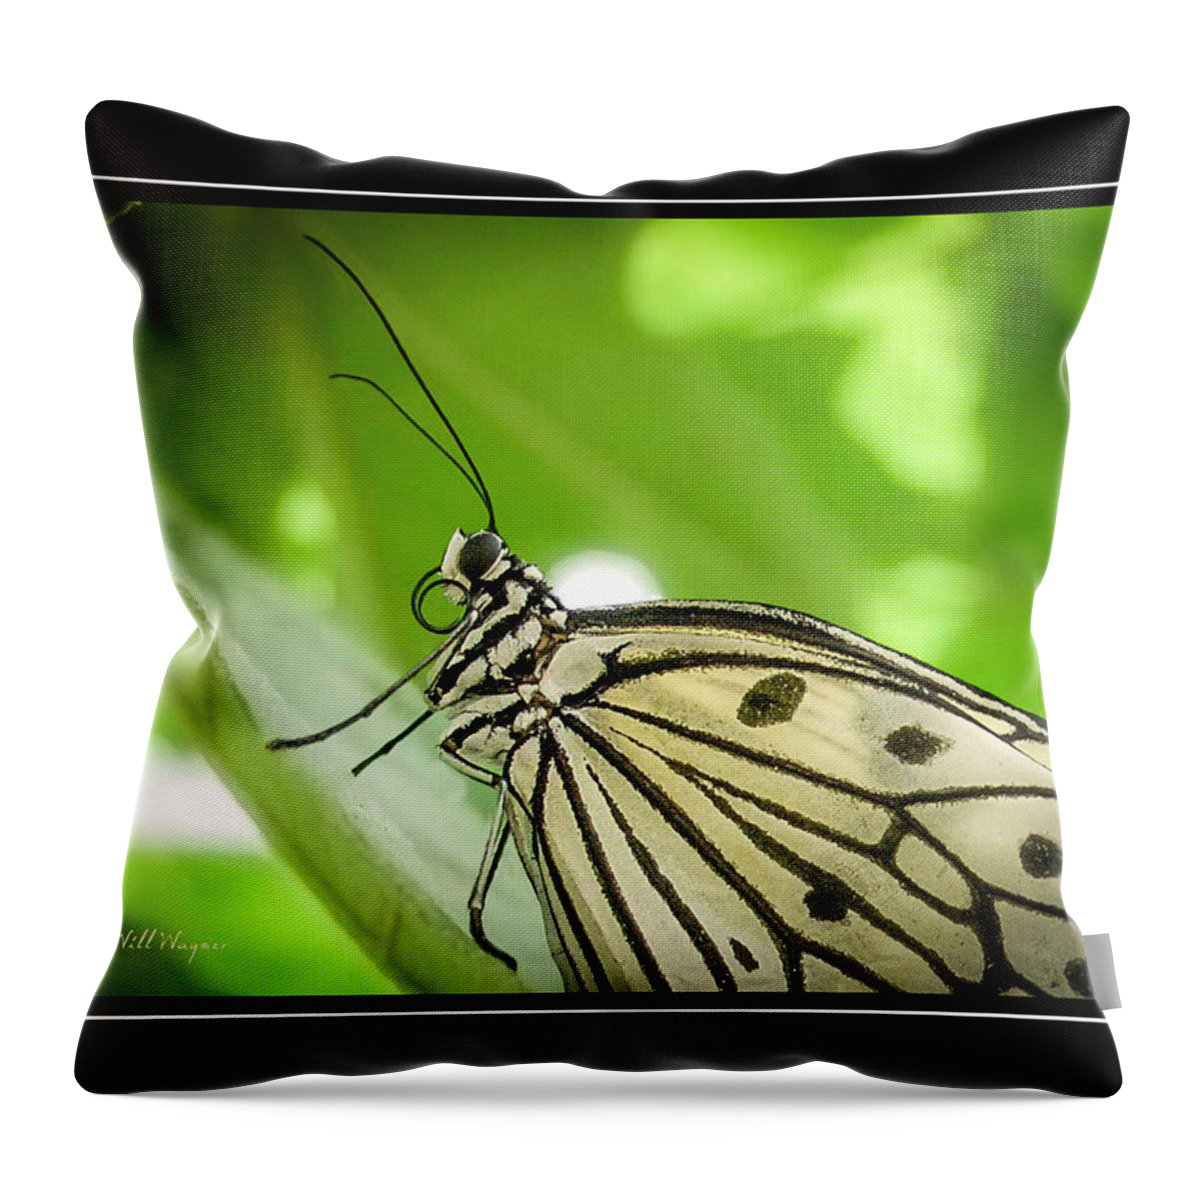 Butterfly Throw Pillow featuring the photograph Butterfly 2 by Will Wagner